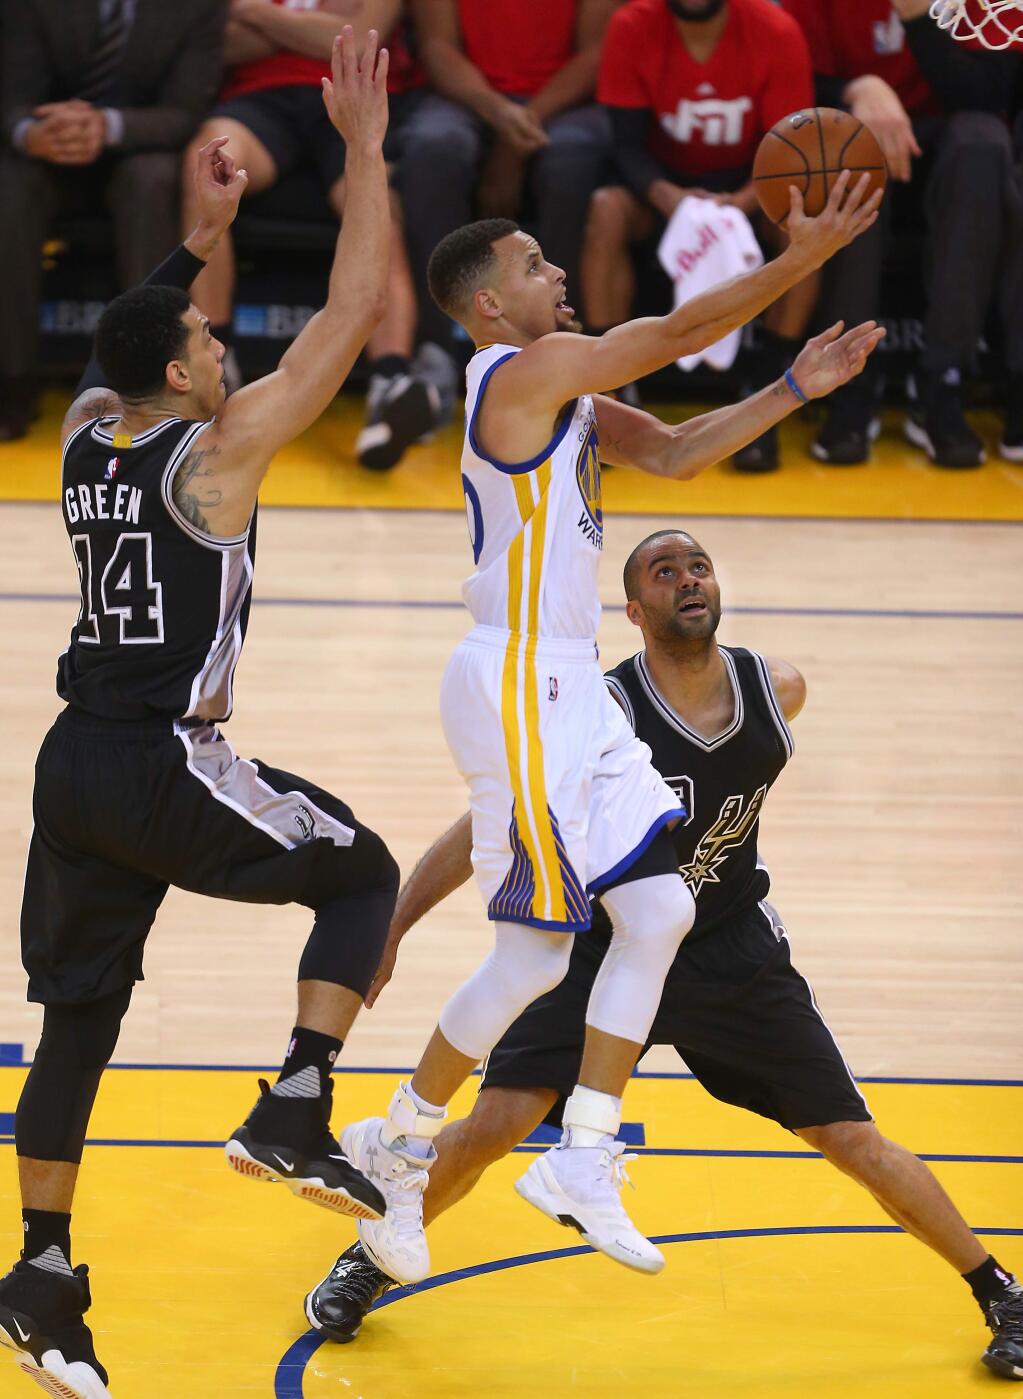 Golden State Warriors guard Stephen Curry goes to the basket between San Antonio Spurs defenders Danny Green and Tony Parker during their game in Oakland on Monday, January 25, 2016. (Christopher Chung/ The Press Democrat)